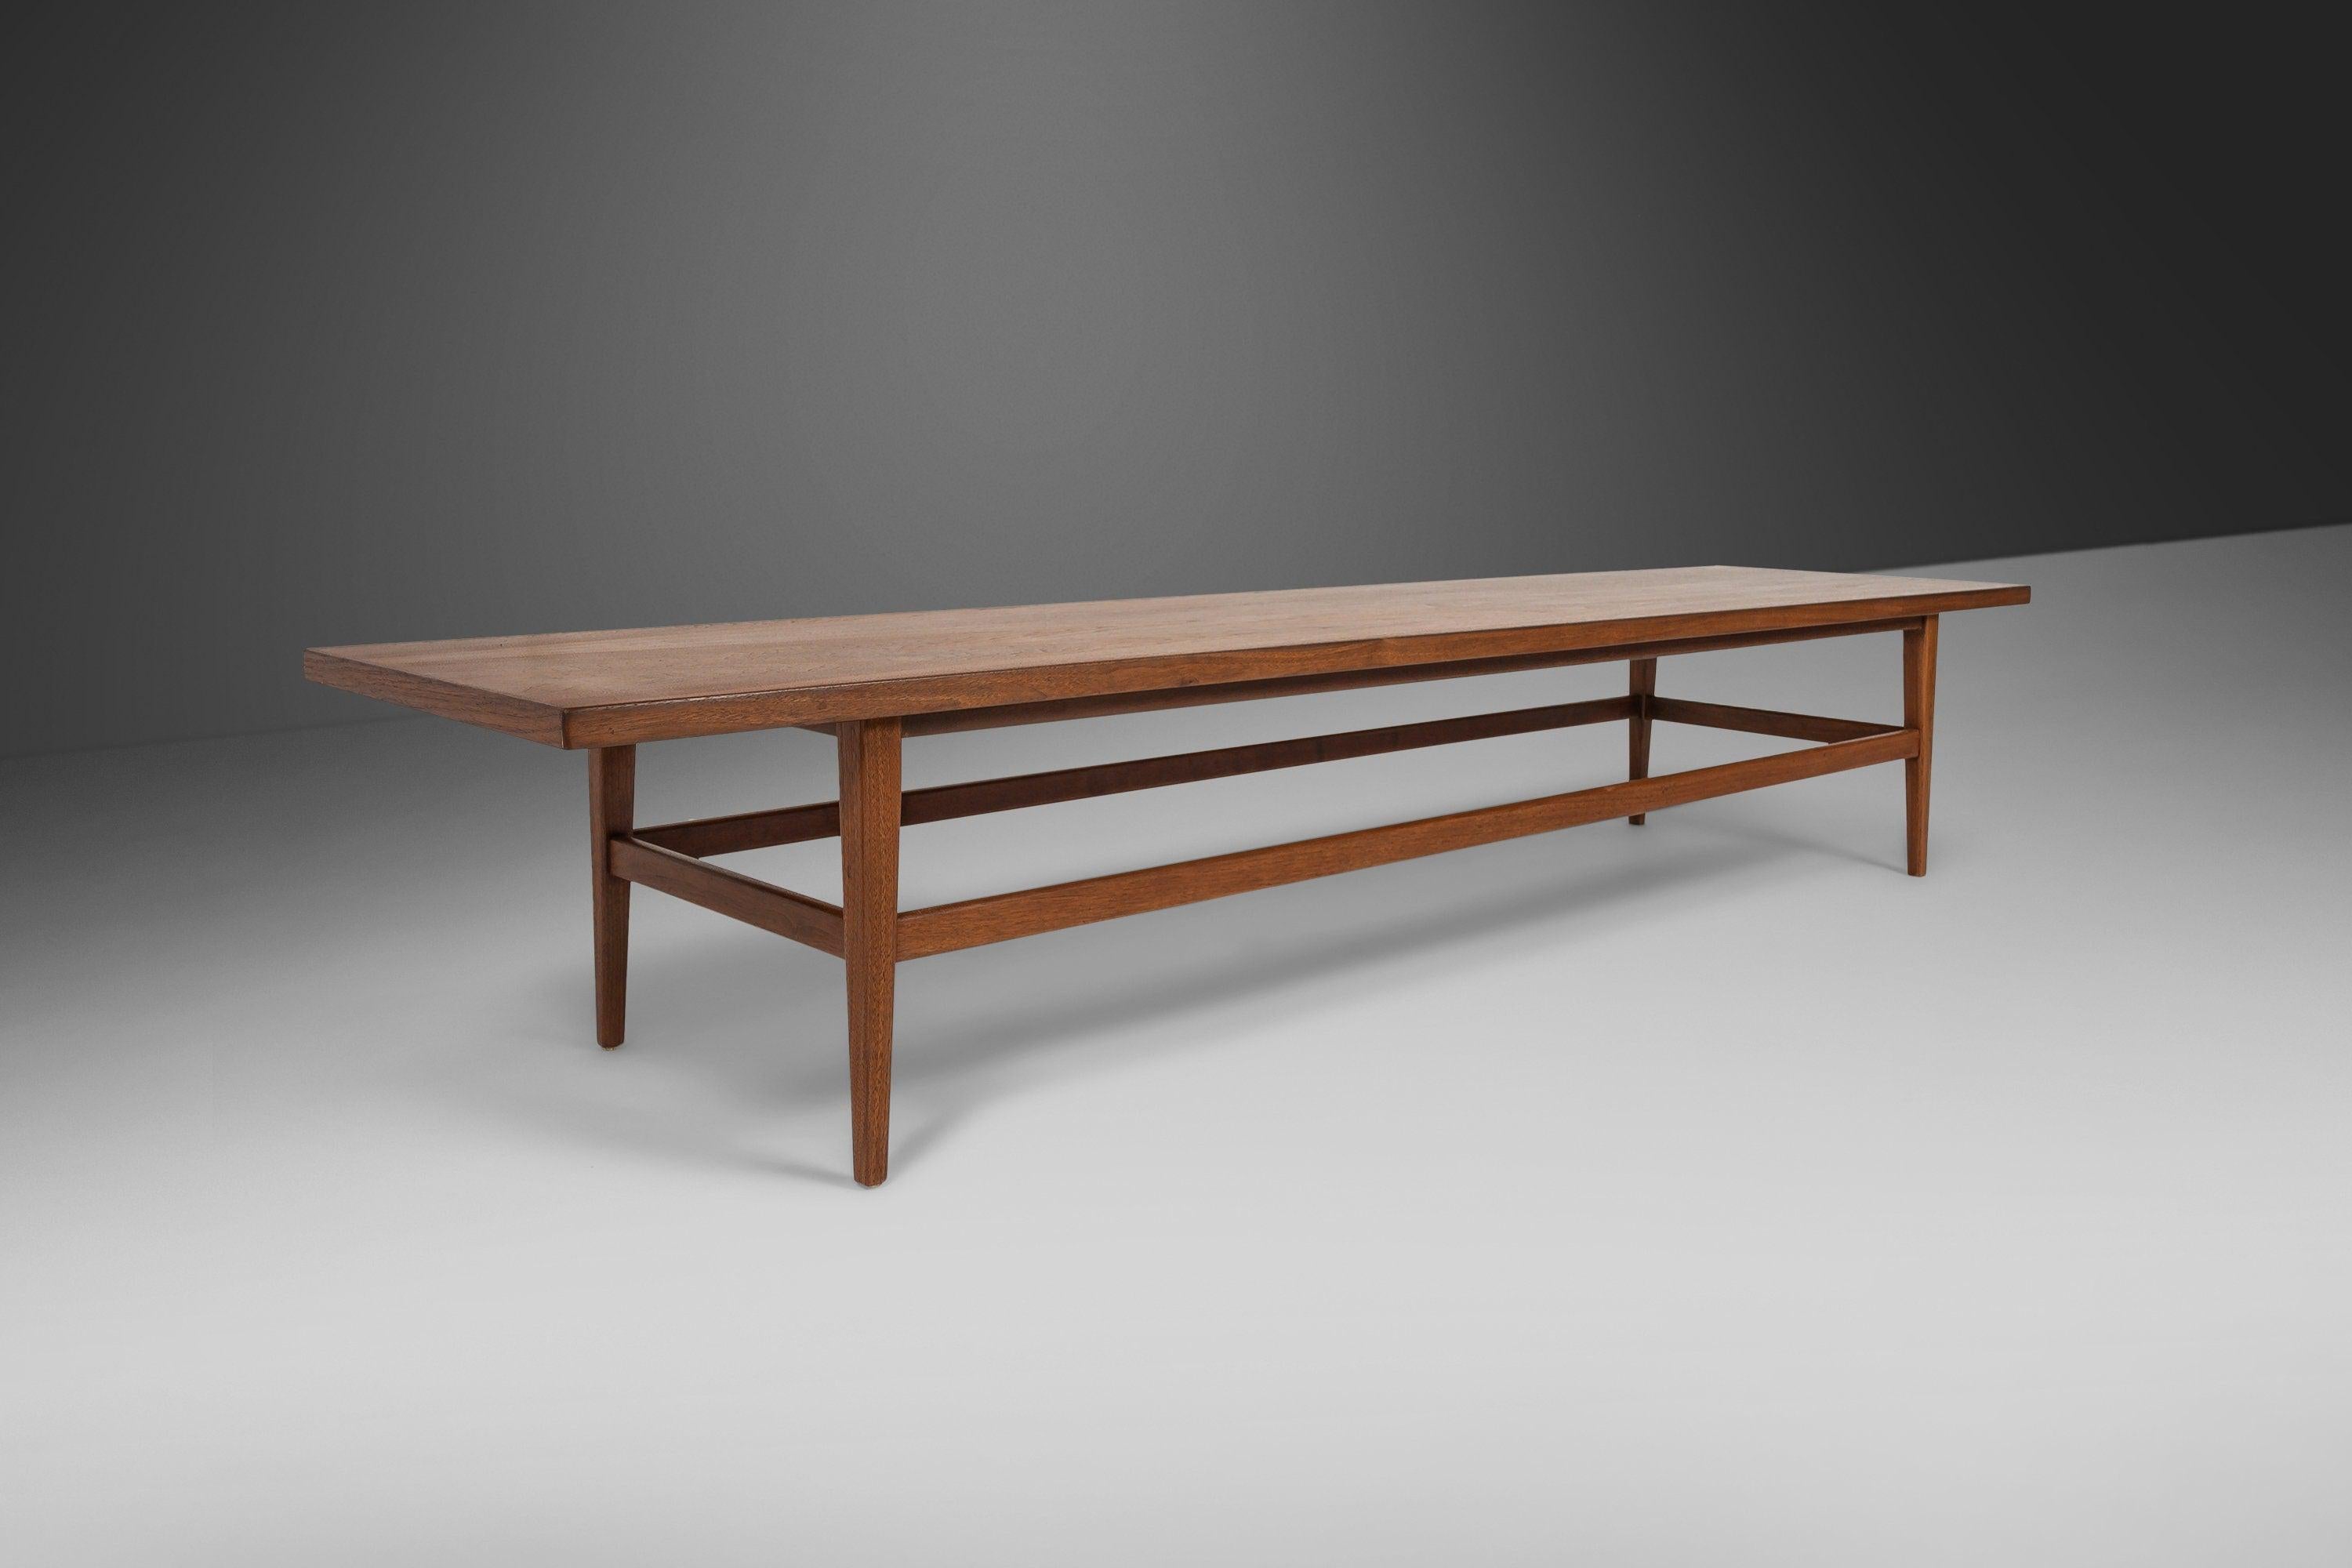 Unknown Extra Long Mid-Century Modern Coffee Table / Bench in Walnut, c. 1960's For Sale